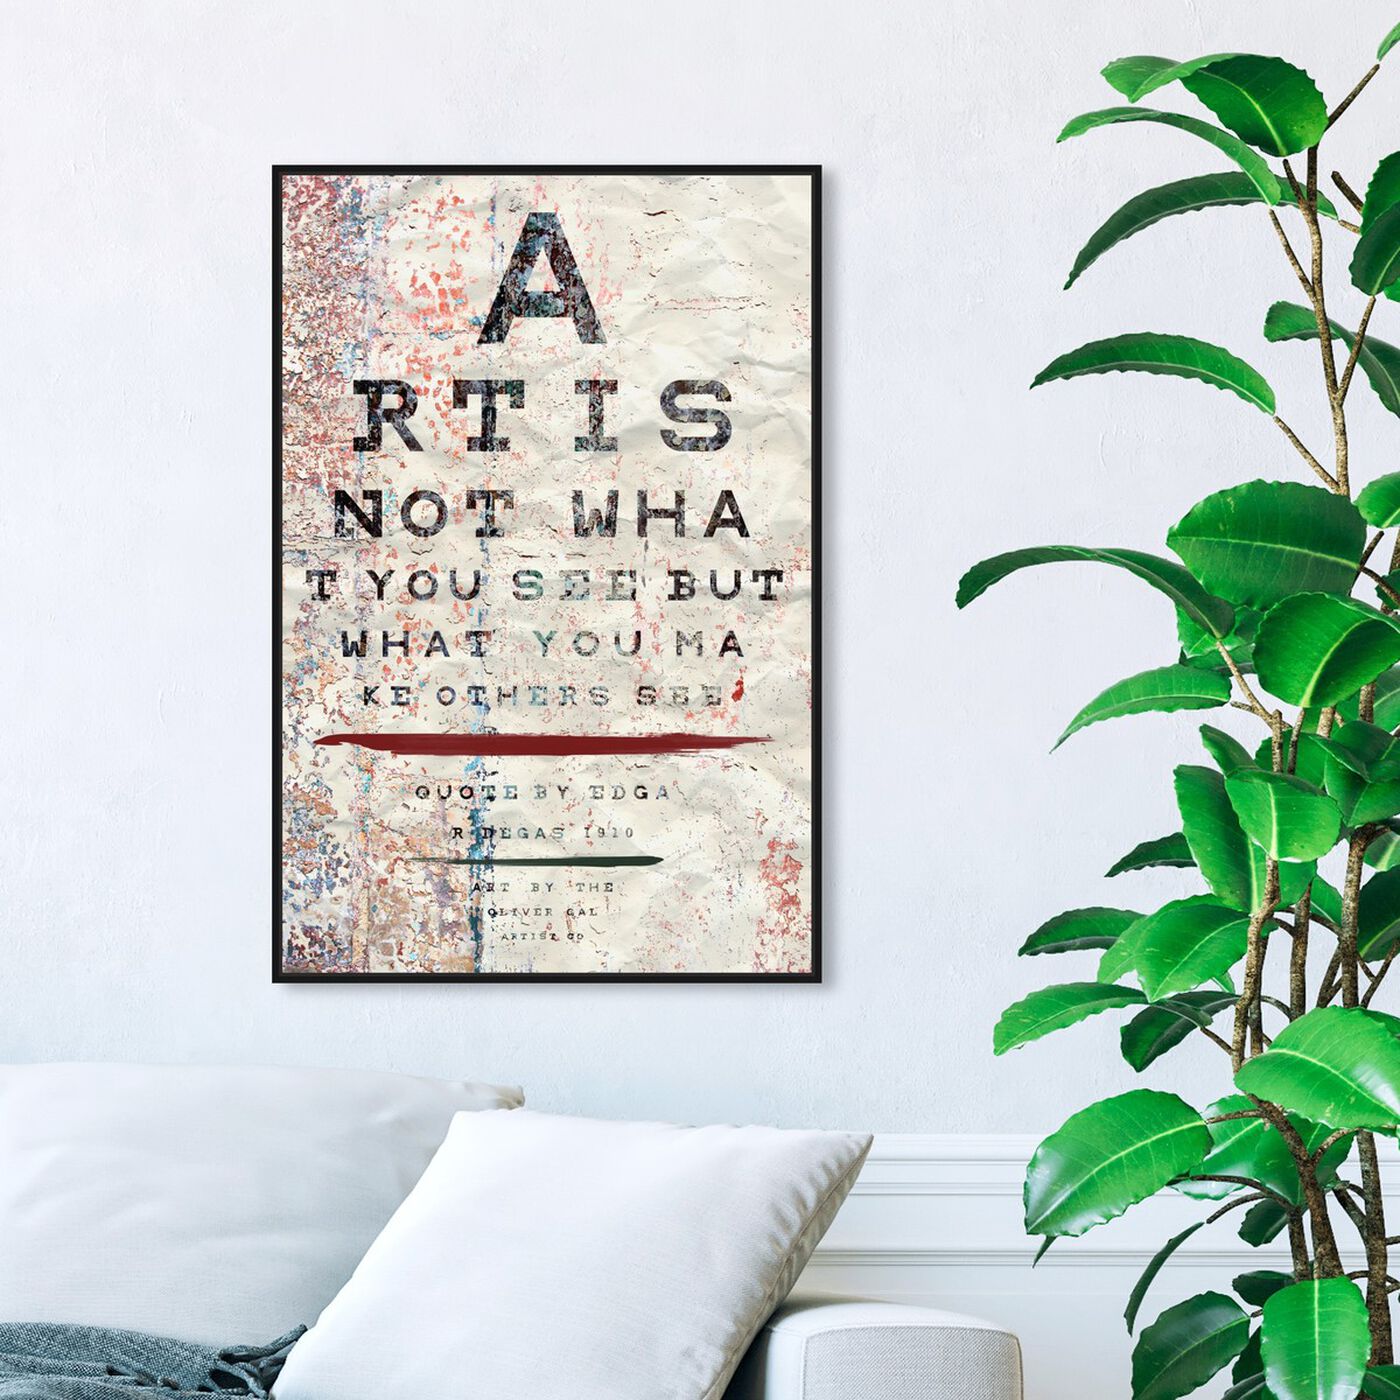 Hanging view of Art is featuring typography and quotes and motivational quotes and sayings art.